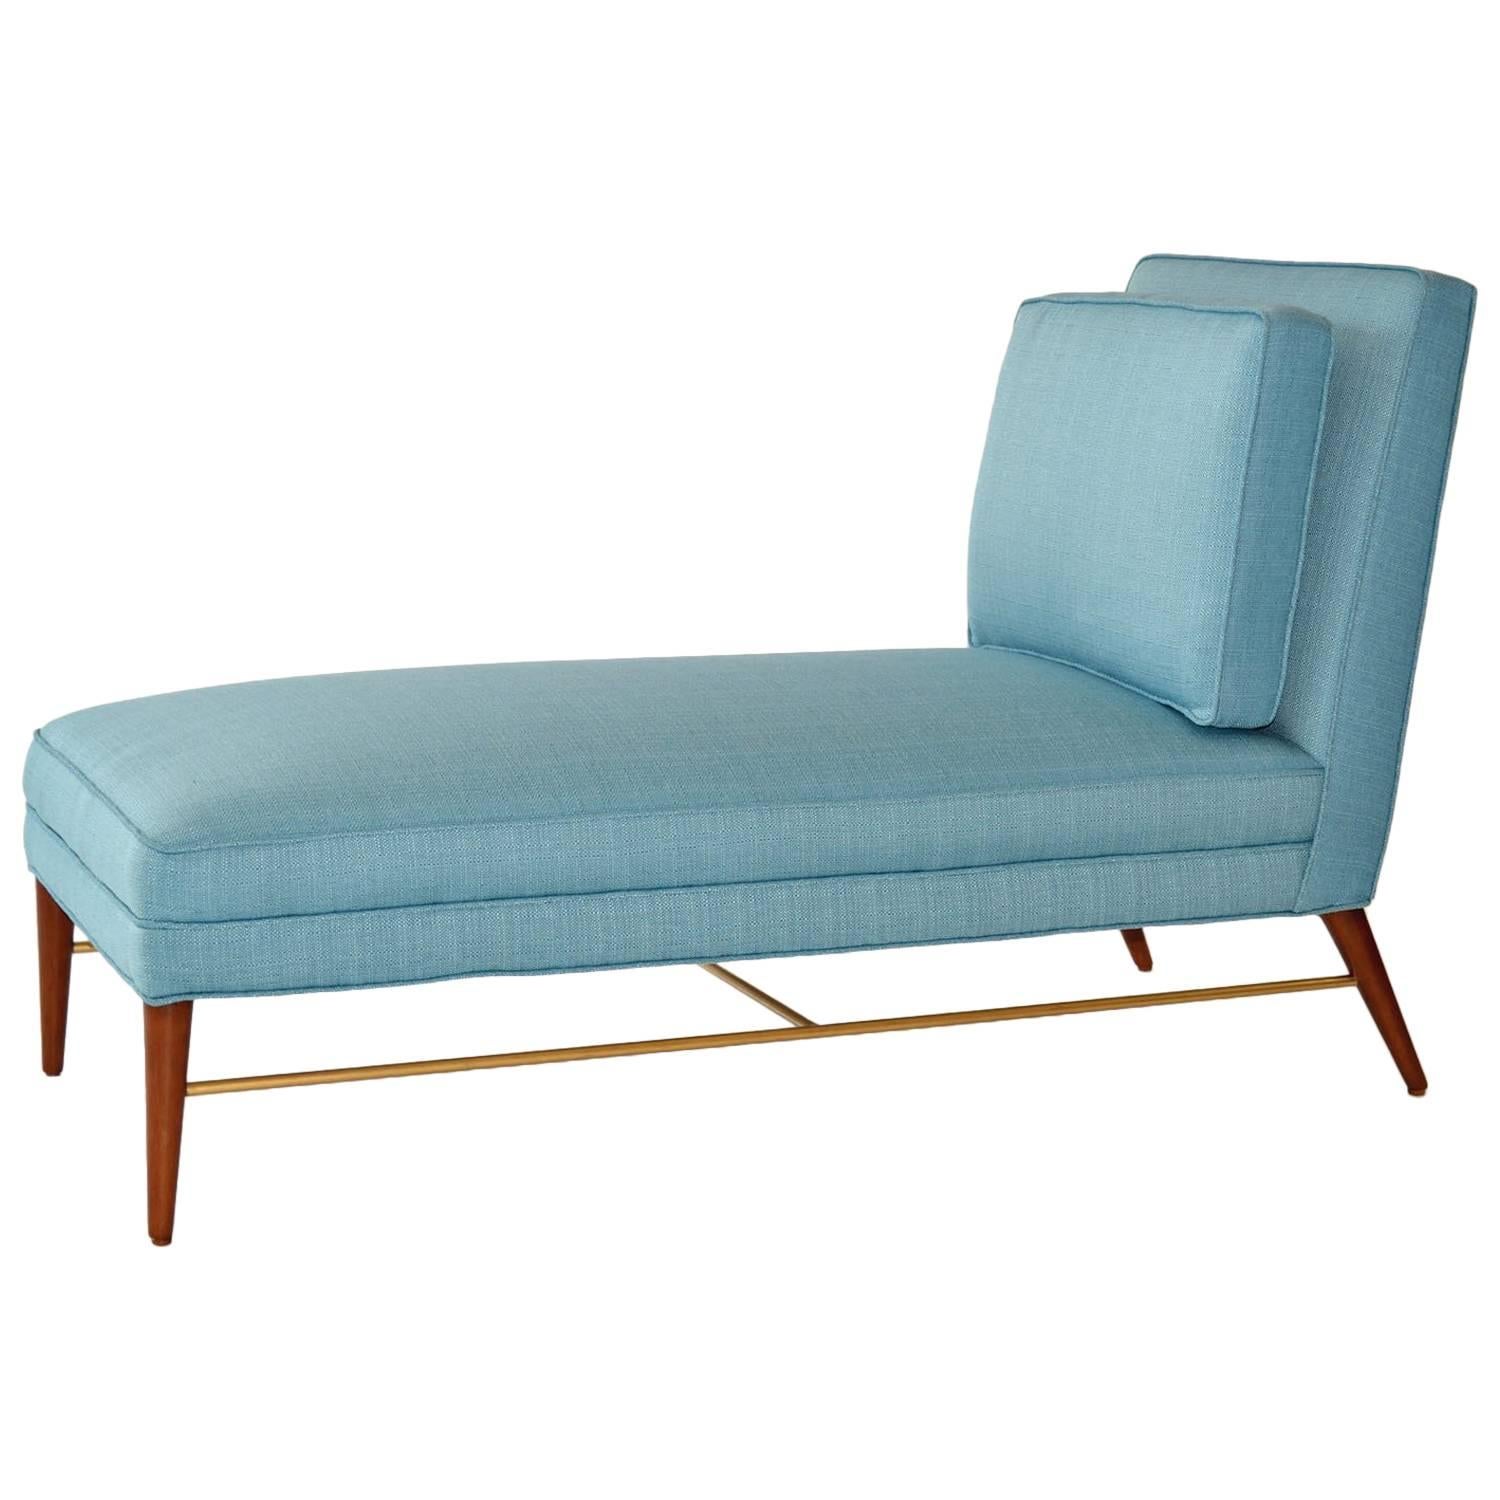 Chaise Lounge by Paul McCobb for Calvin 1950s Mid-Century Modern